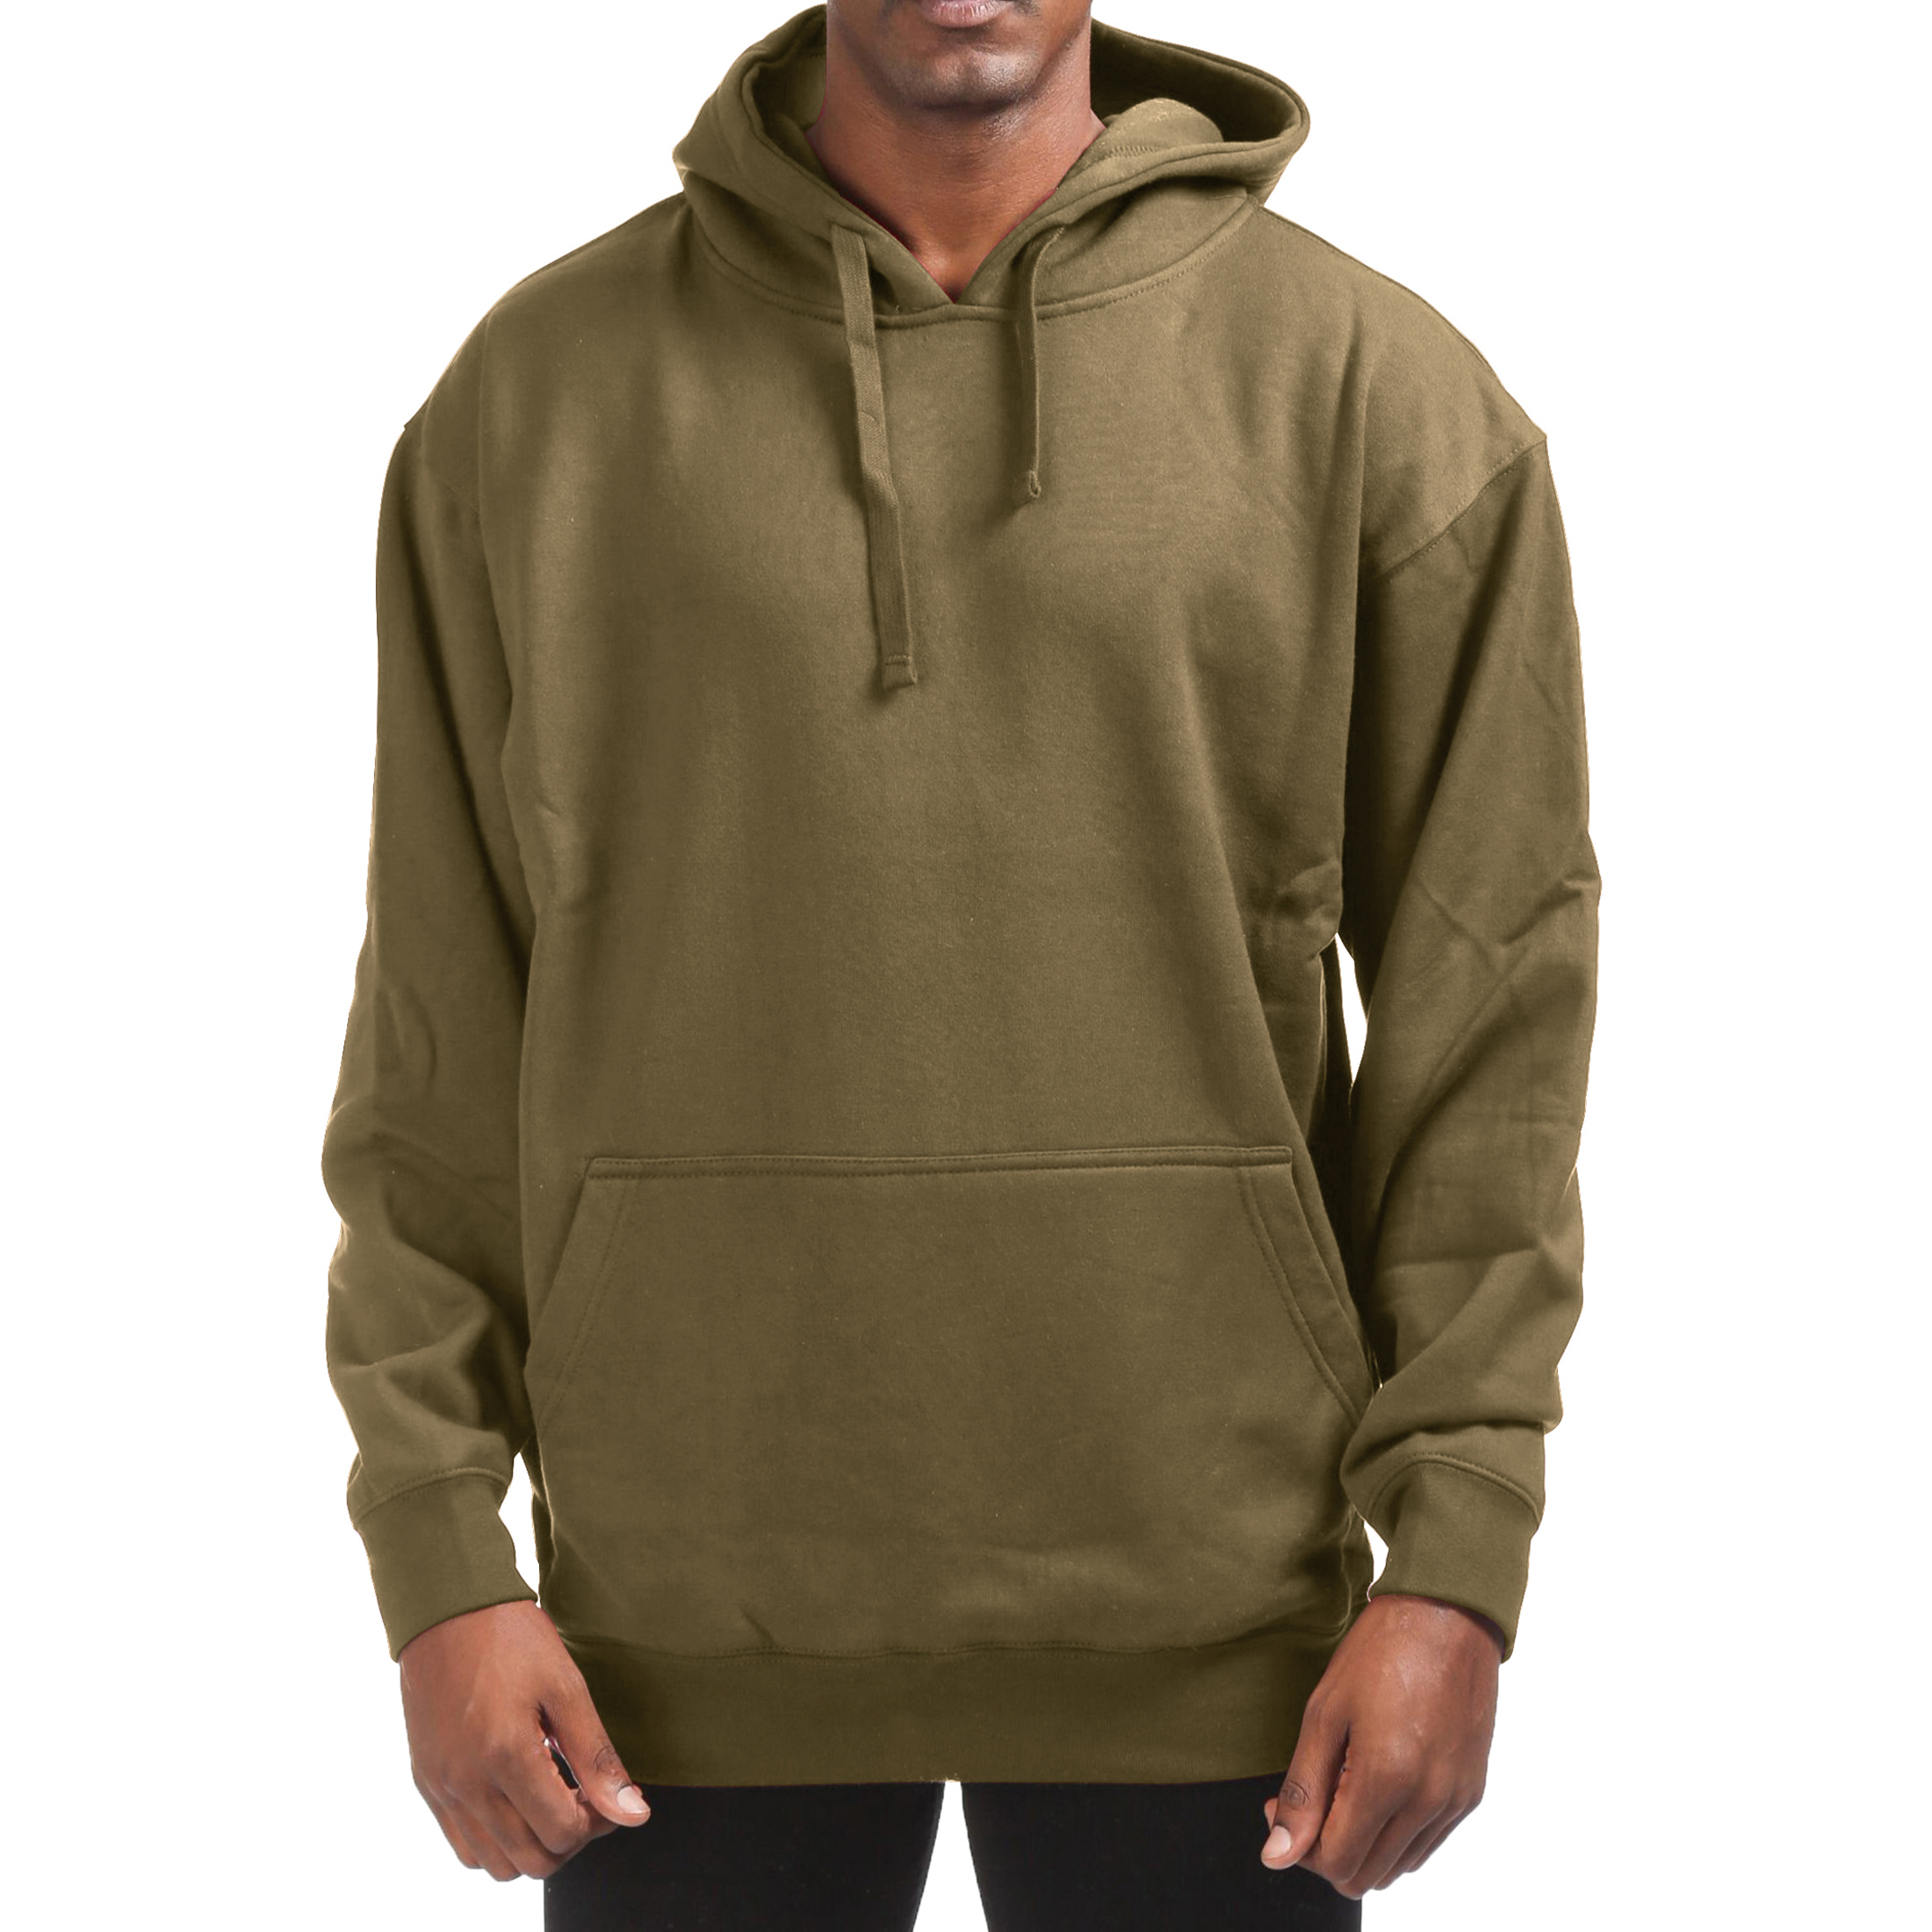 Men's Cotton-Blend Fleece Pullover Hoodie With Pocket (Big & Tall Sizes Available) - Olive, 2X-Large